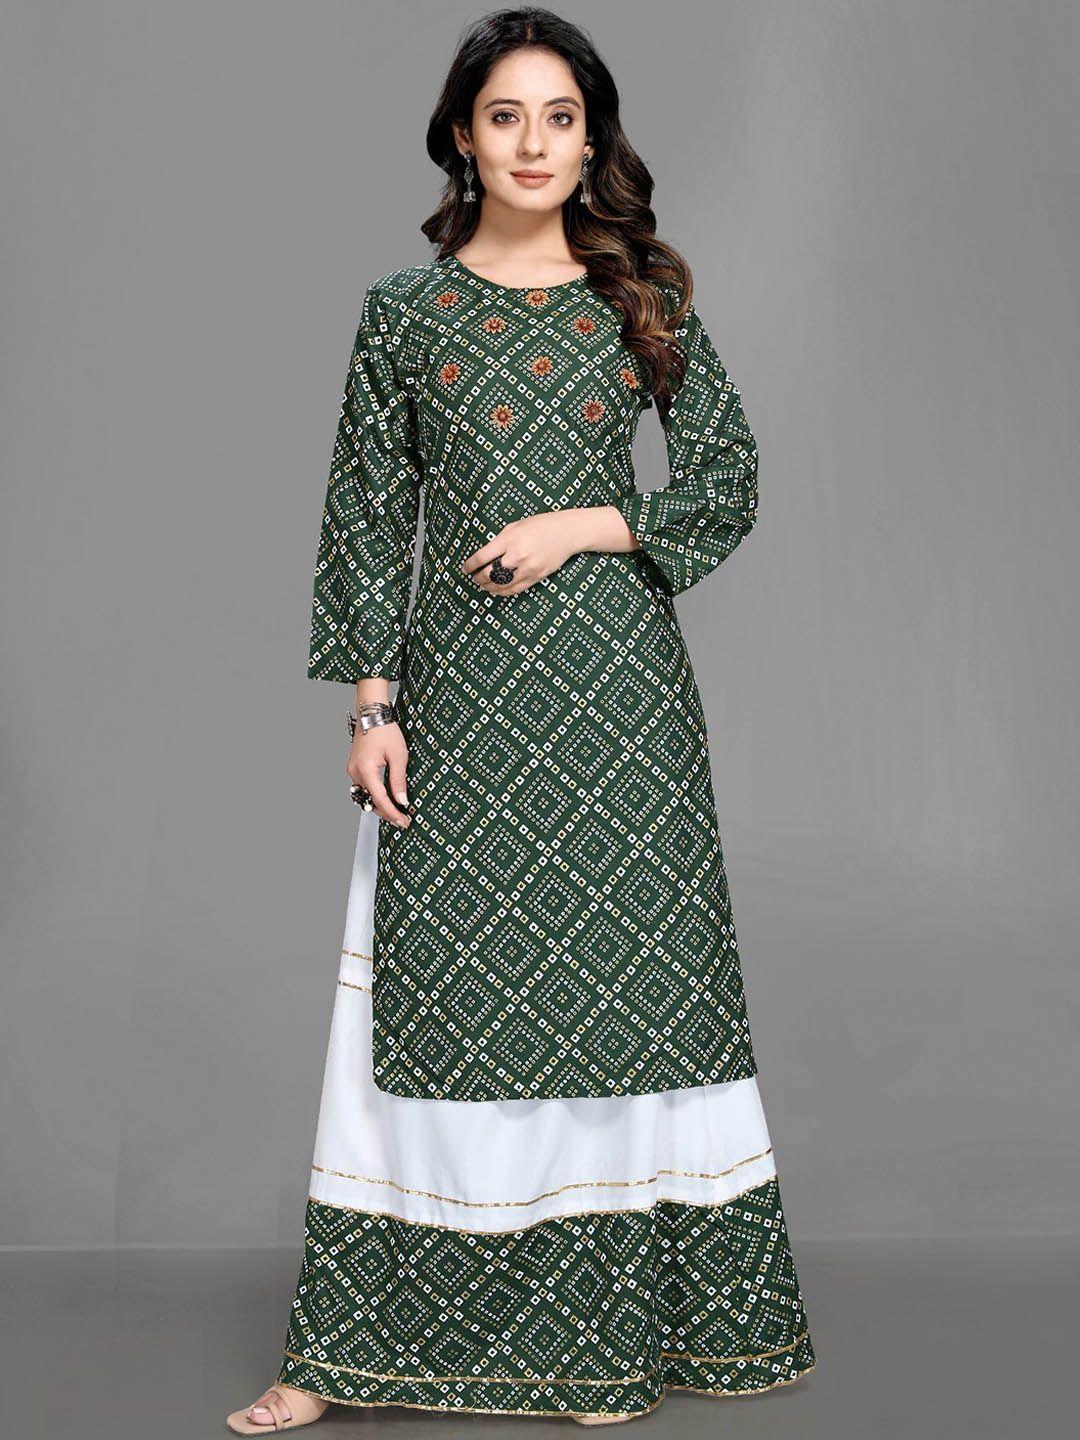 queenswear creation women green ethnic motifs printed beads and stones kurta with skirt